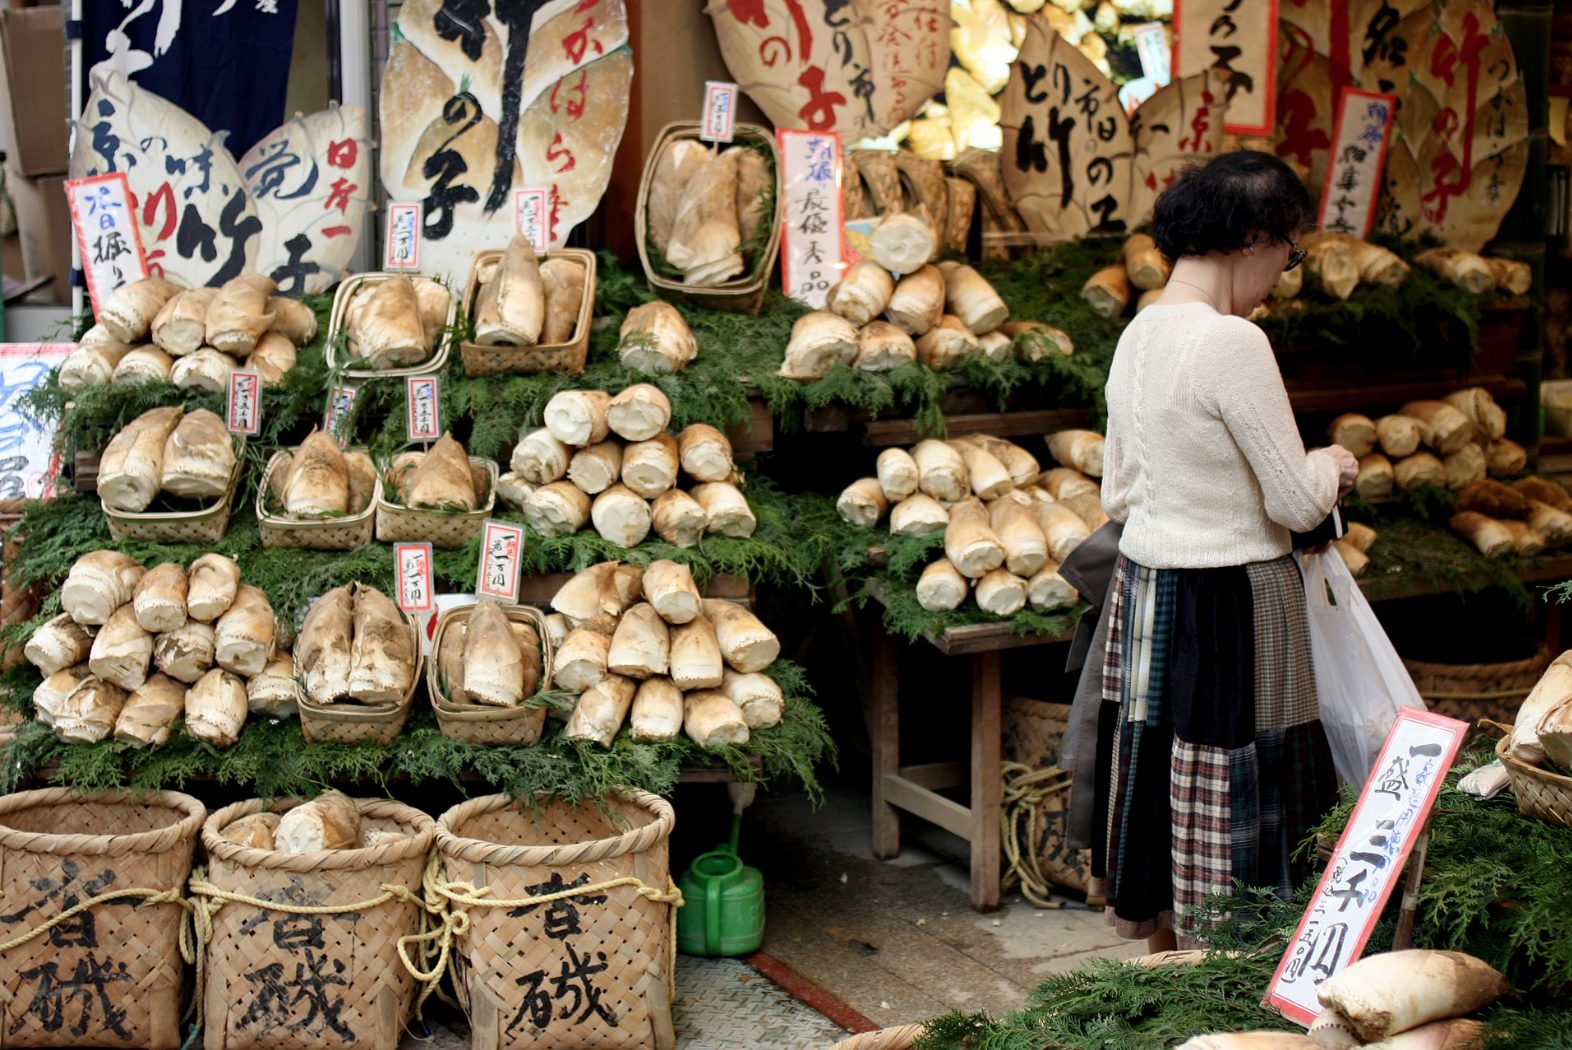 Bamboo shoots in a Japanese market